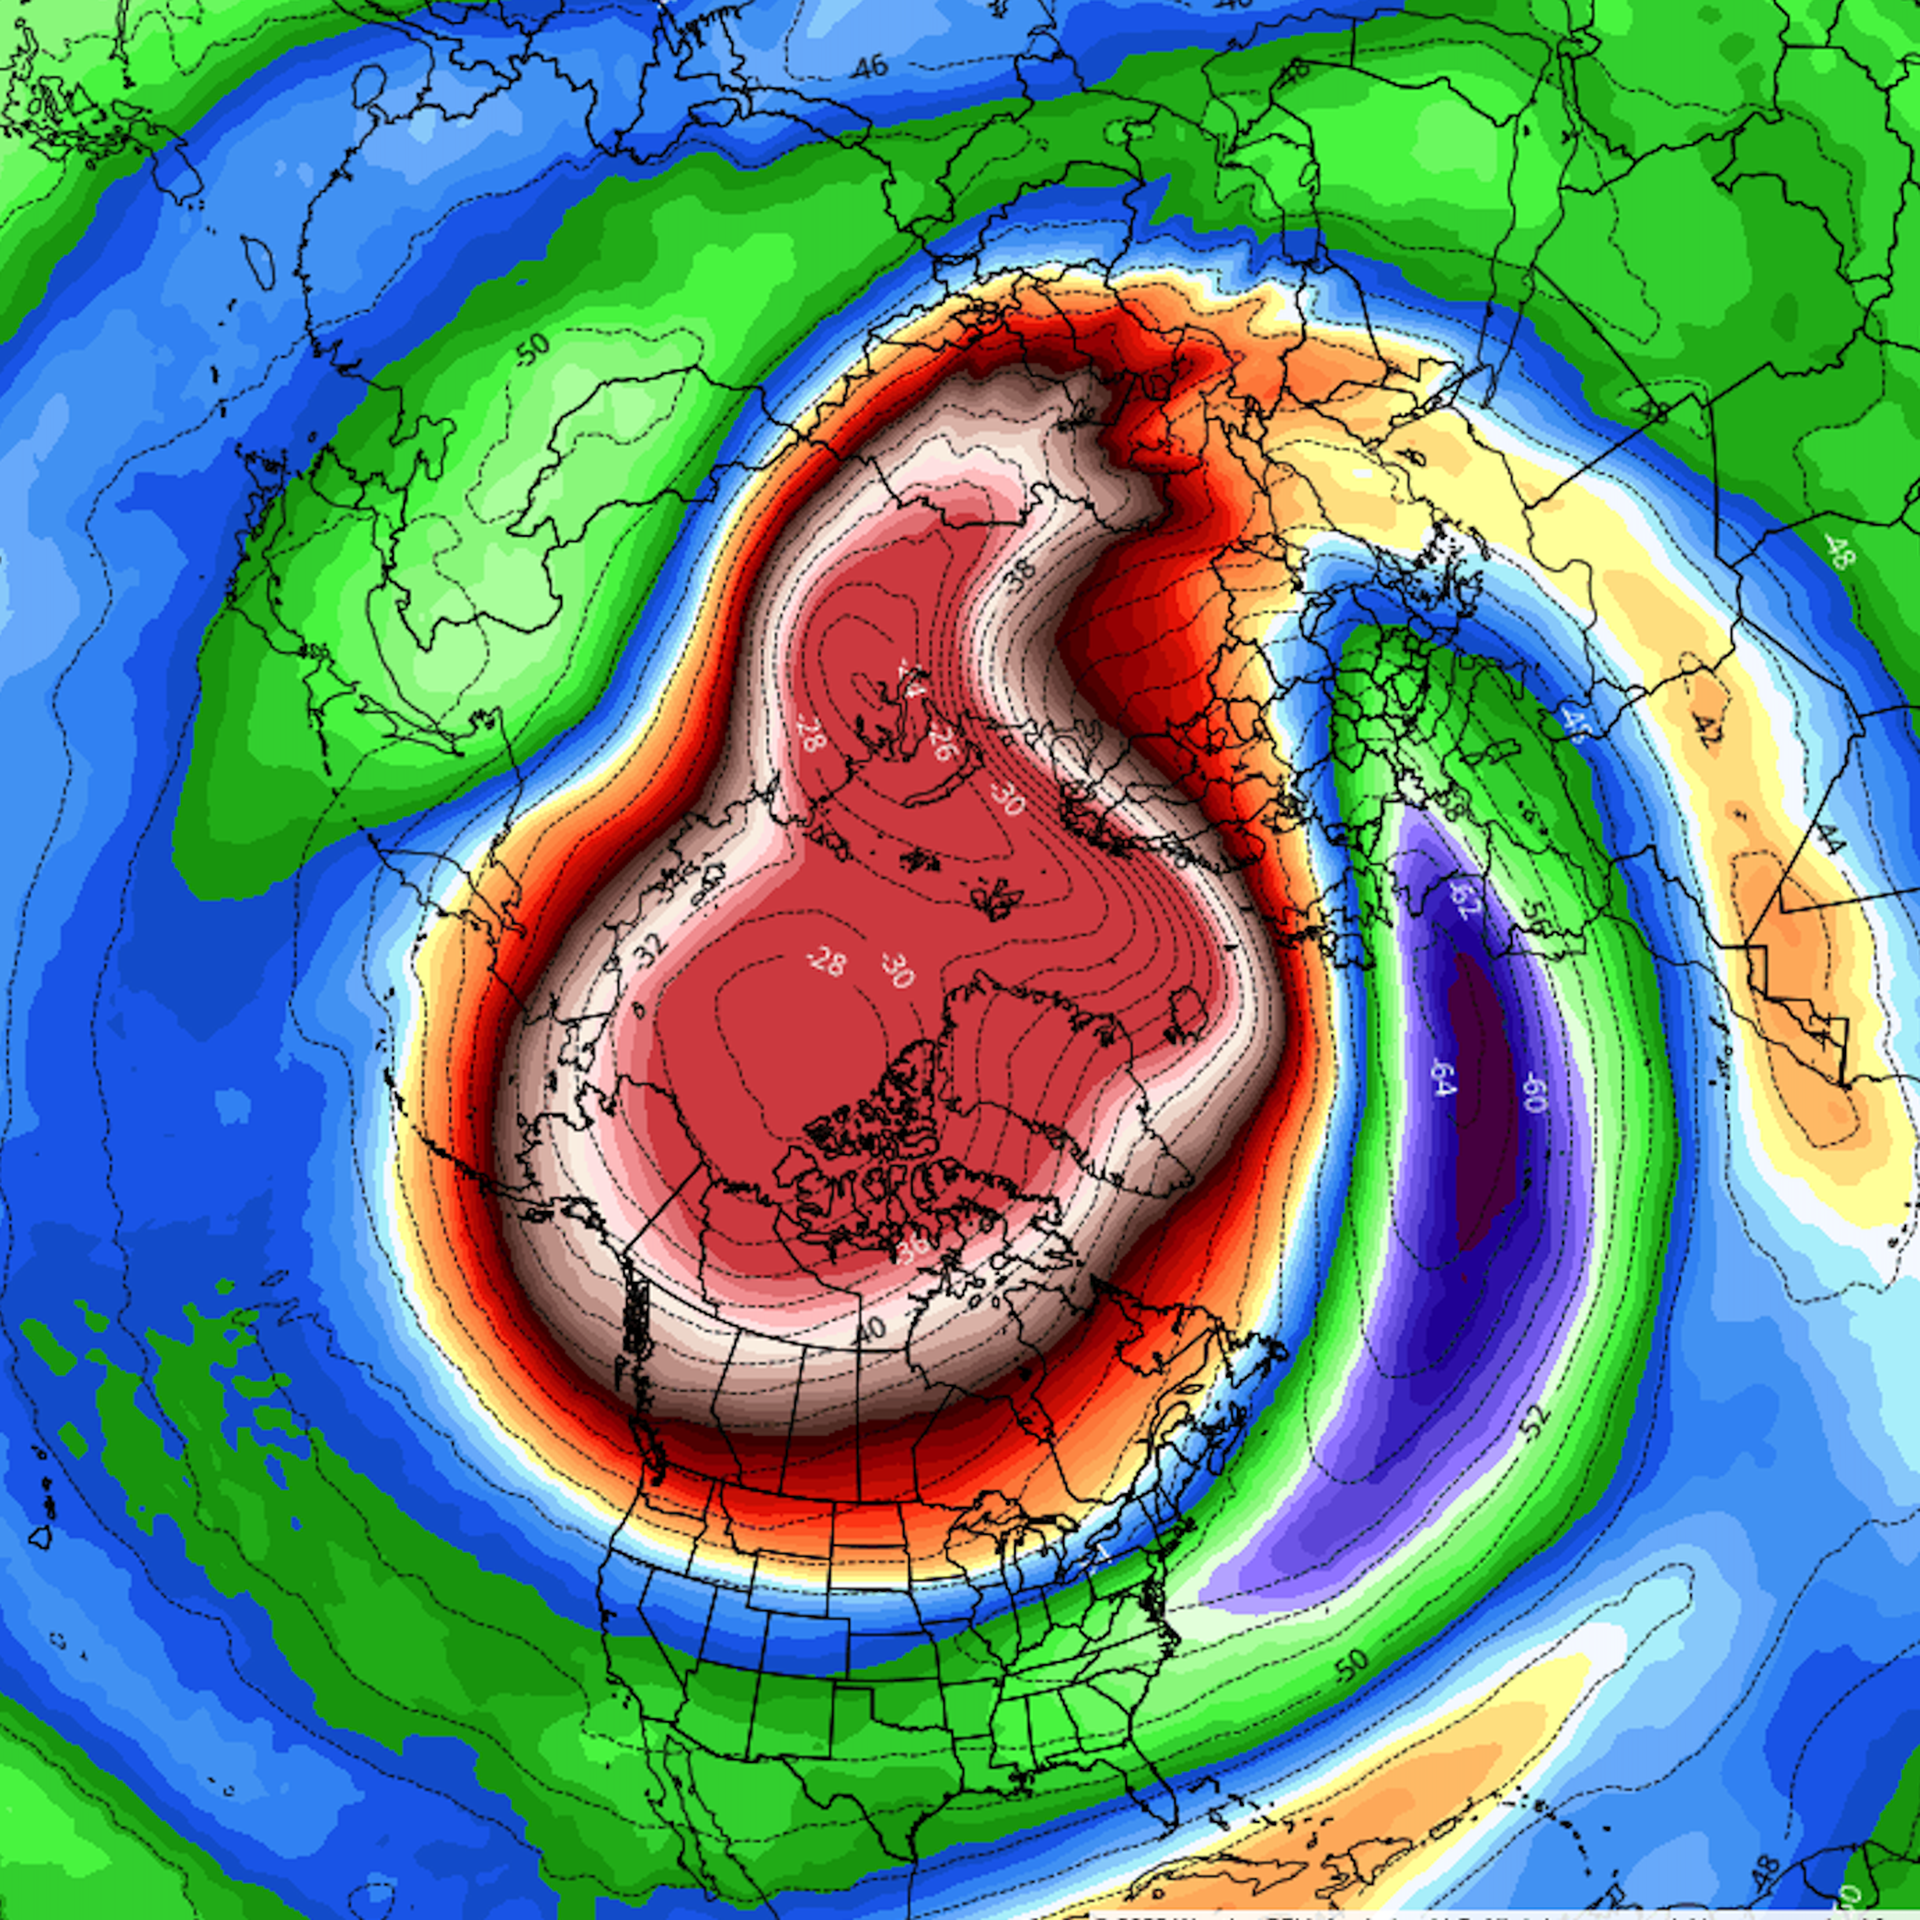 Computer model image depicting a strong stratospheric warming event over the North Pole.